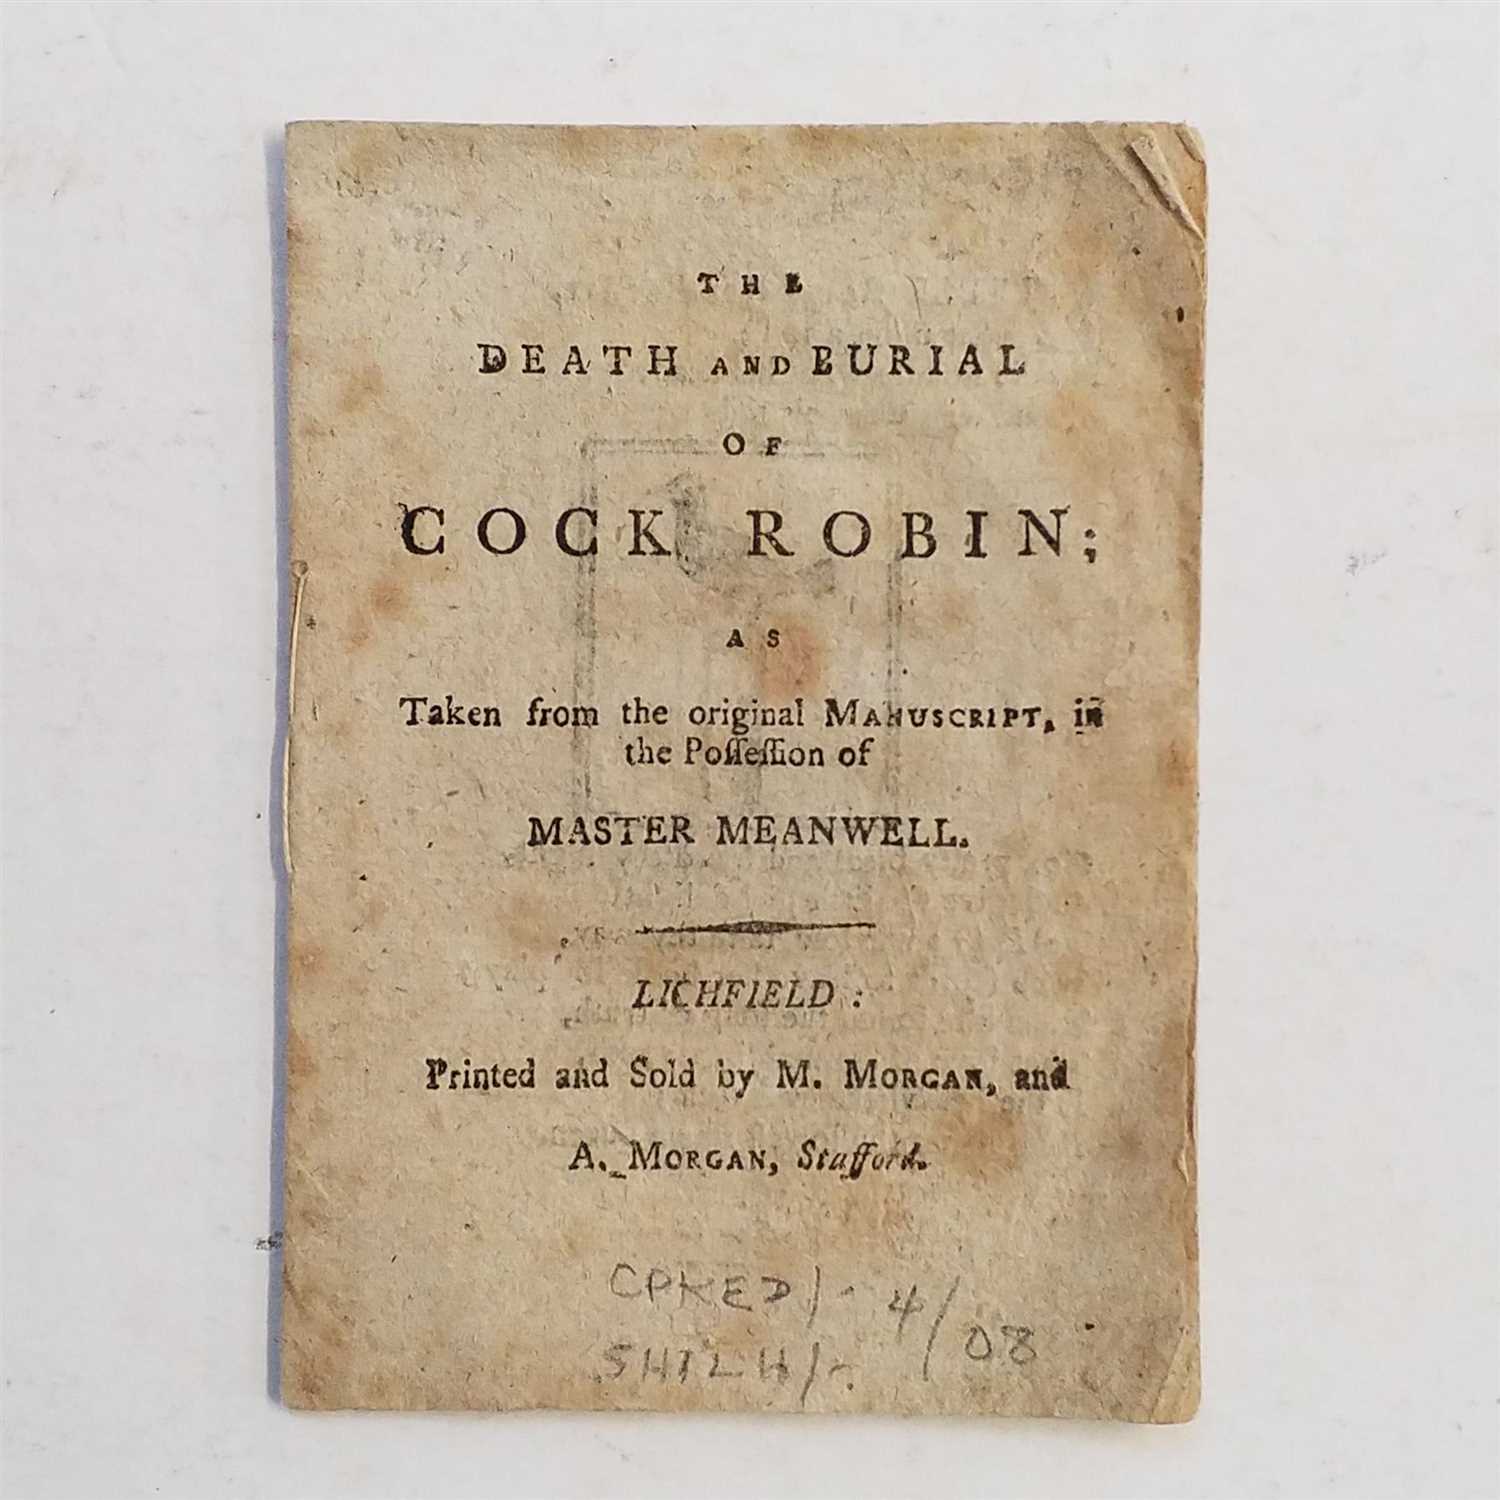 Lot 488 - Cock Robin. The Death and Burial of Cock Robin, circa 1800